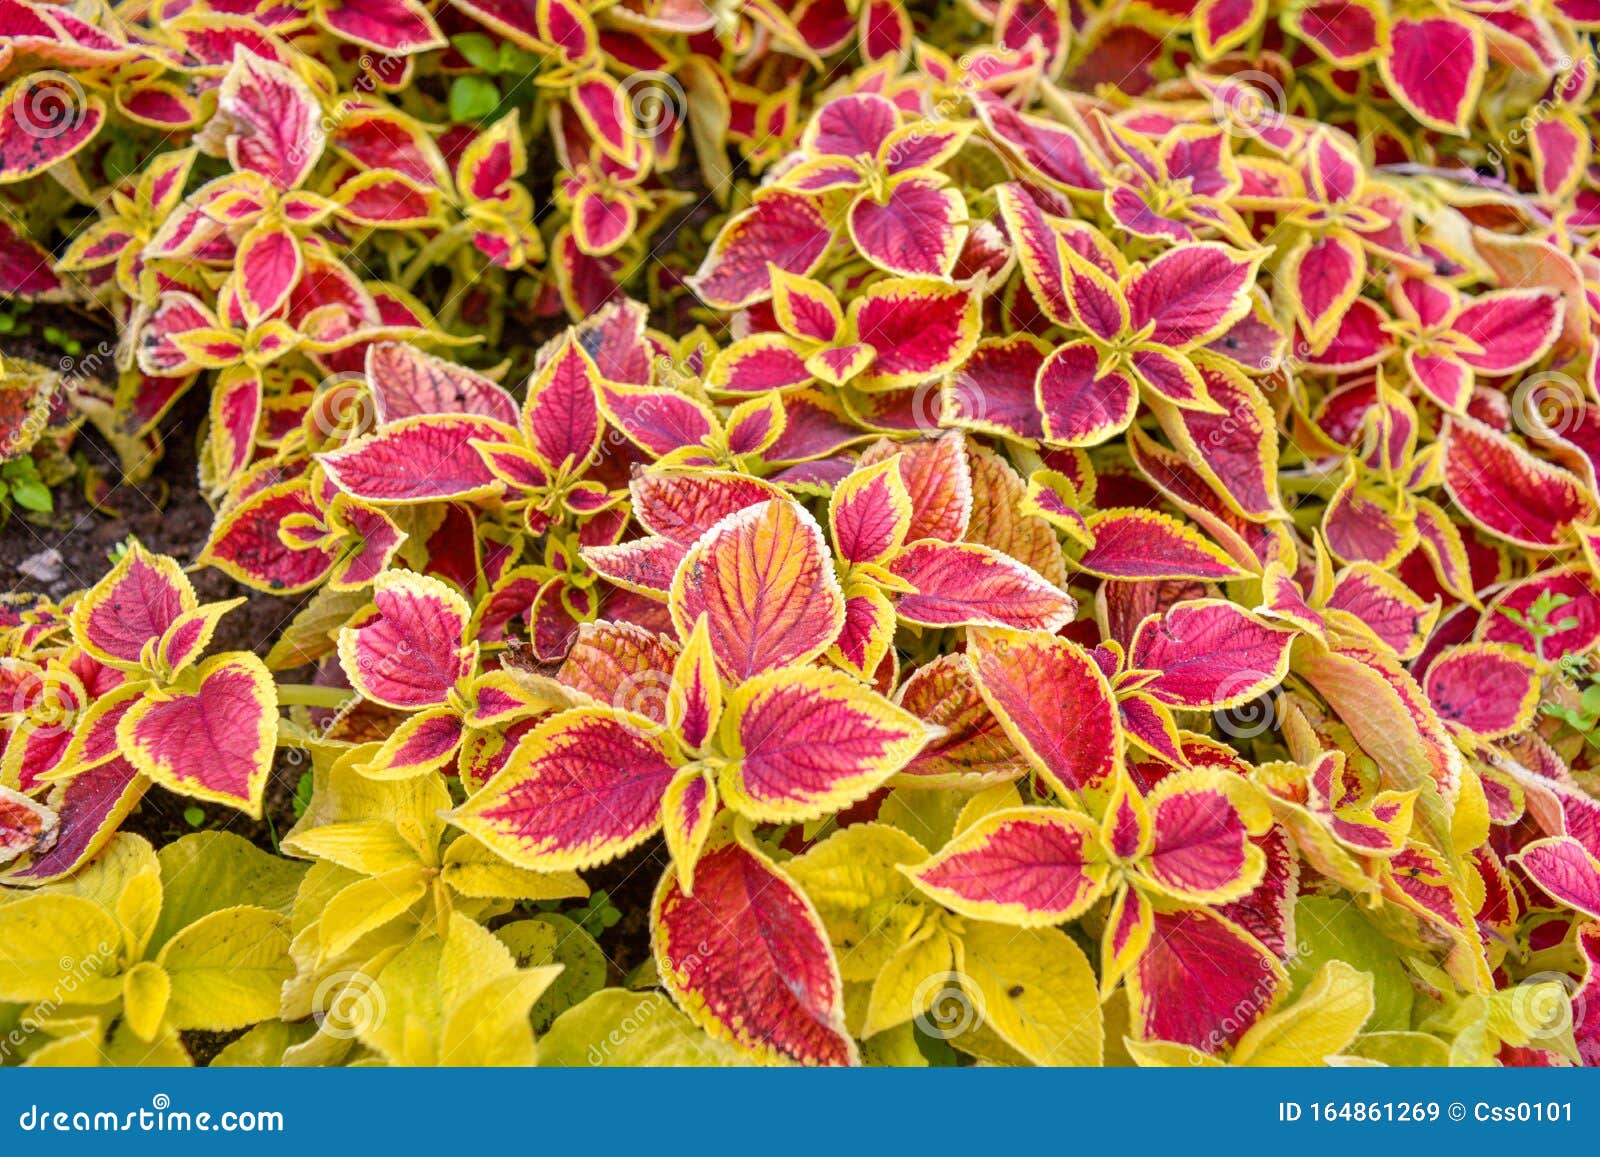 Garden Coleus Plants With Bright Red Leaves Cover Themselves With A Flower Bed Stock Image Image Of Botanical Bush 164861269